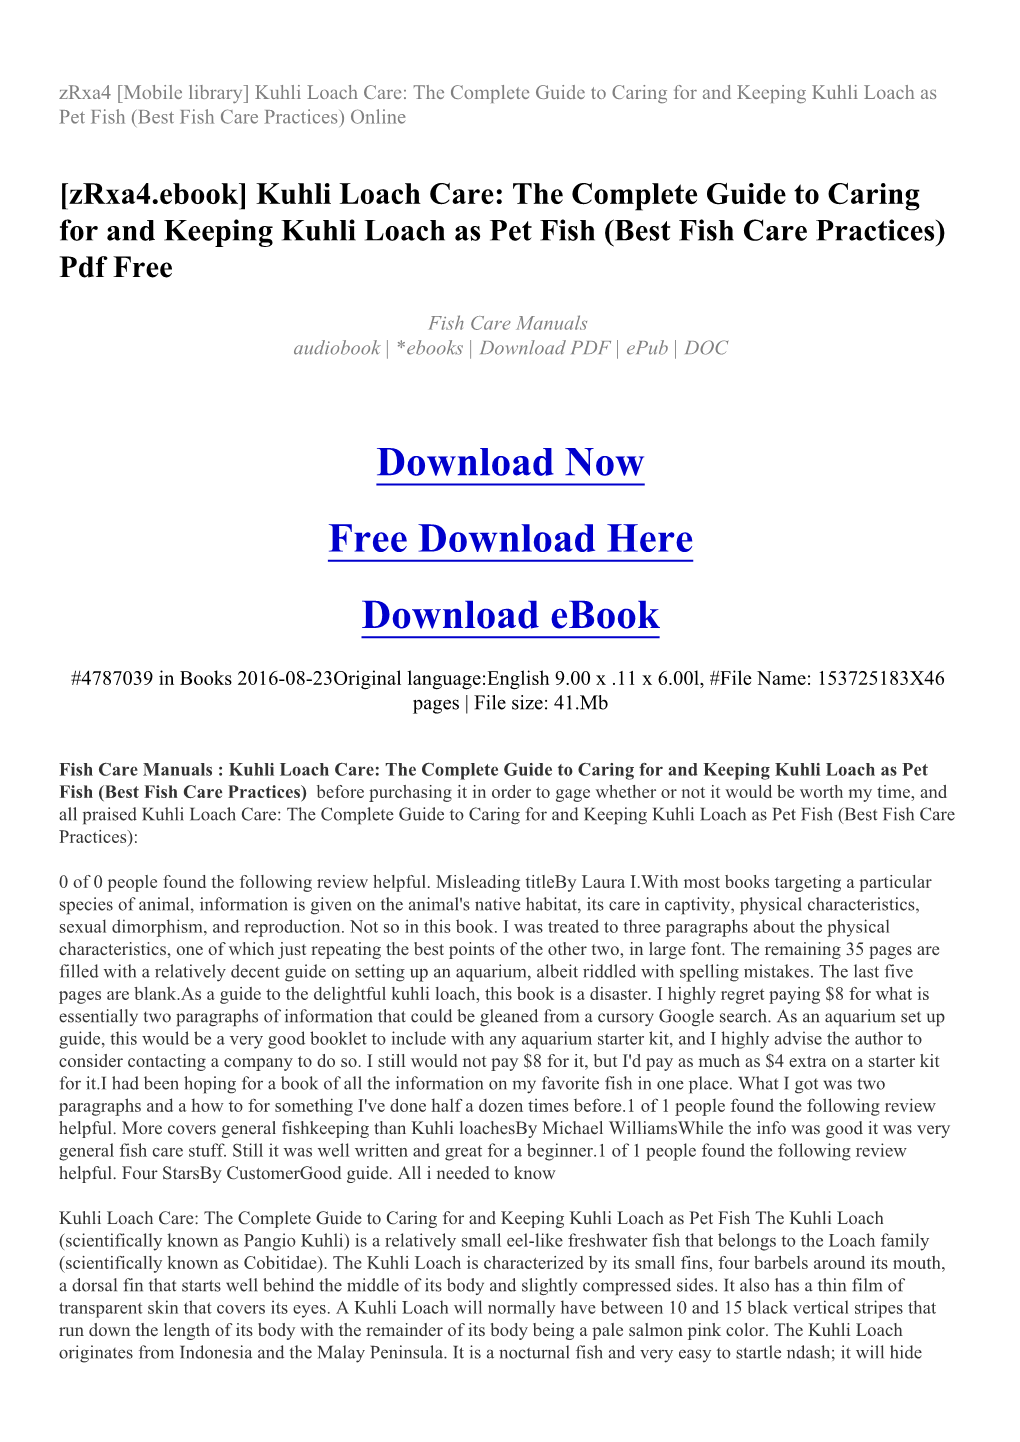 Kuhli Loach Care: the Complete Guide to Caring for and Keeping Kuhli Loach As Pet Fish (Best Fish Care Practices) Online